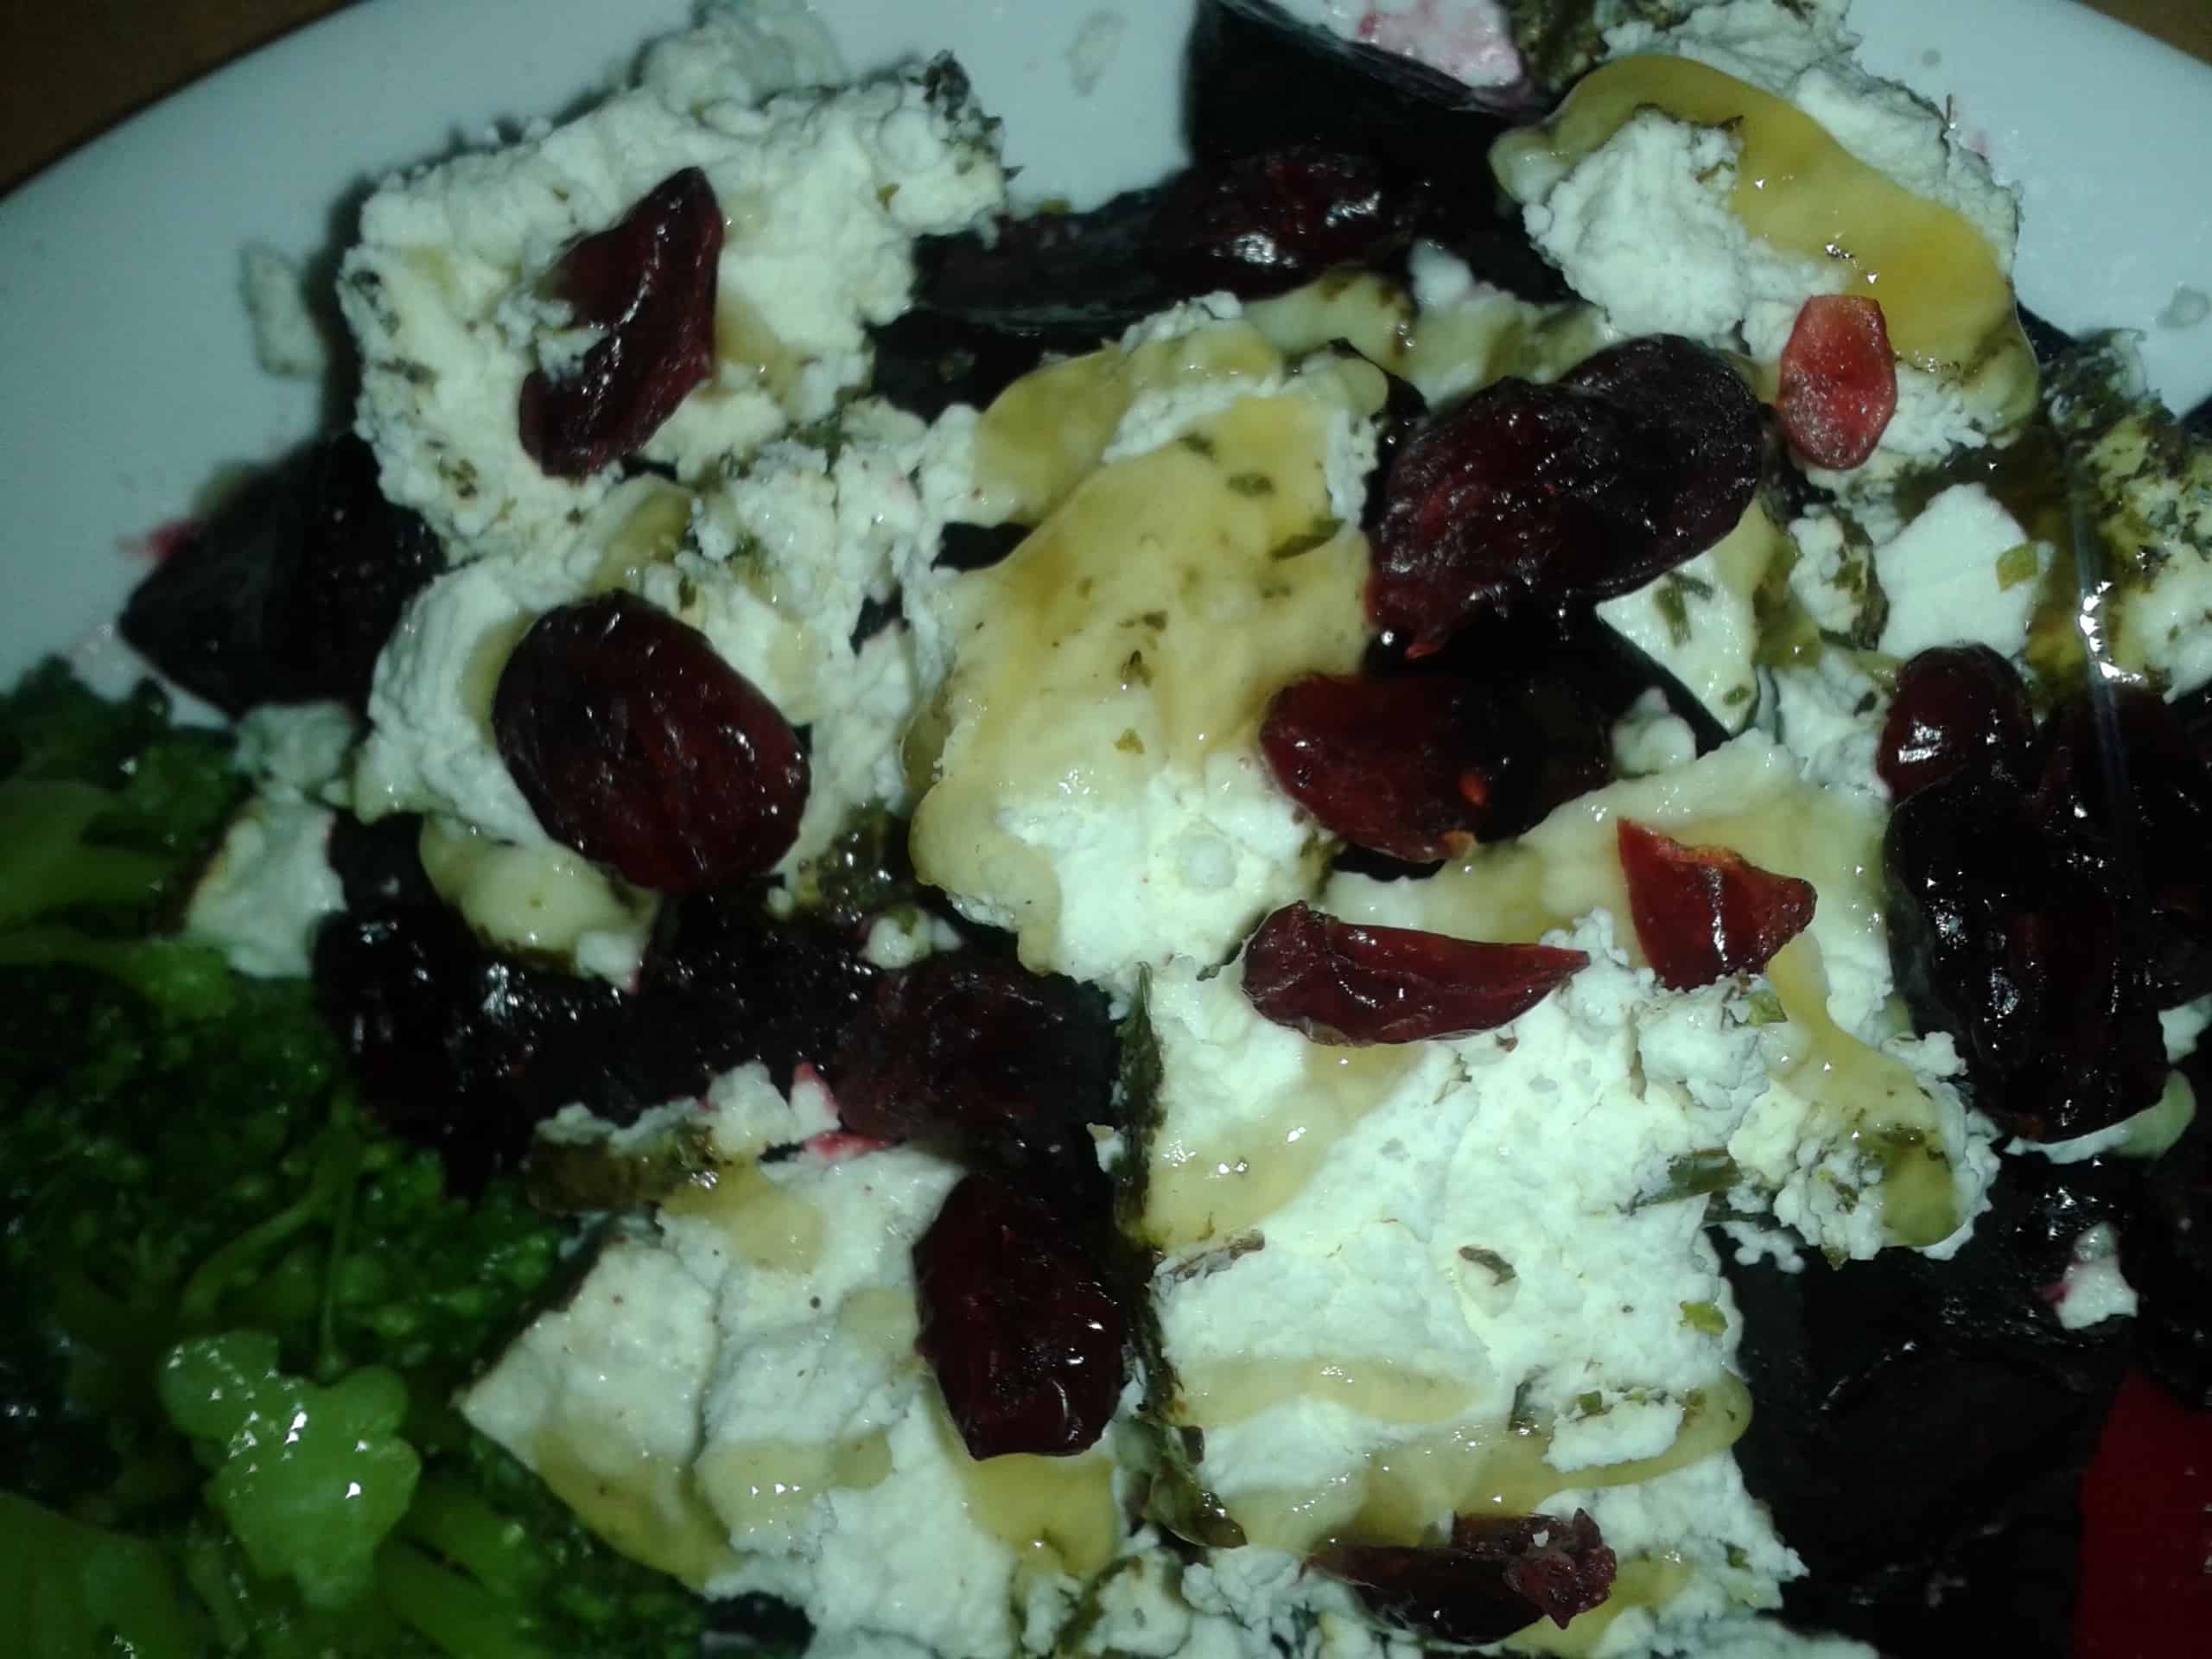 Baked Beets topped with Goat Cheese, Honey and Sunflower Seeds